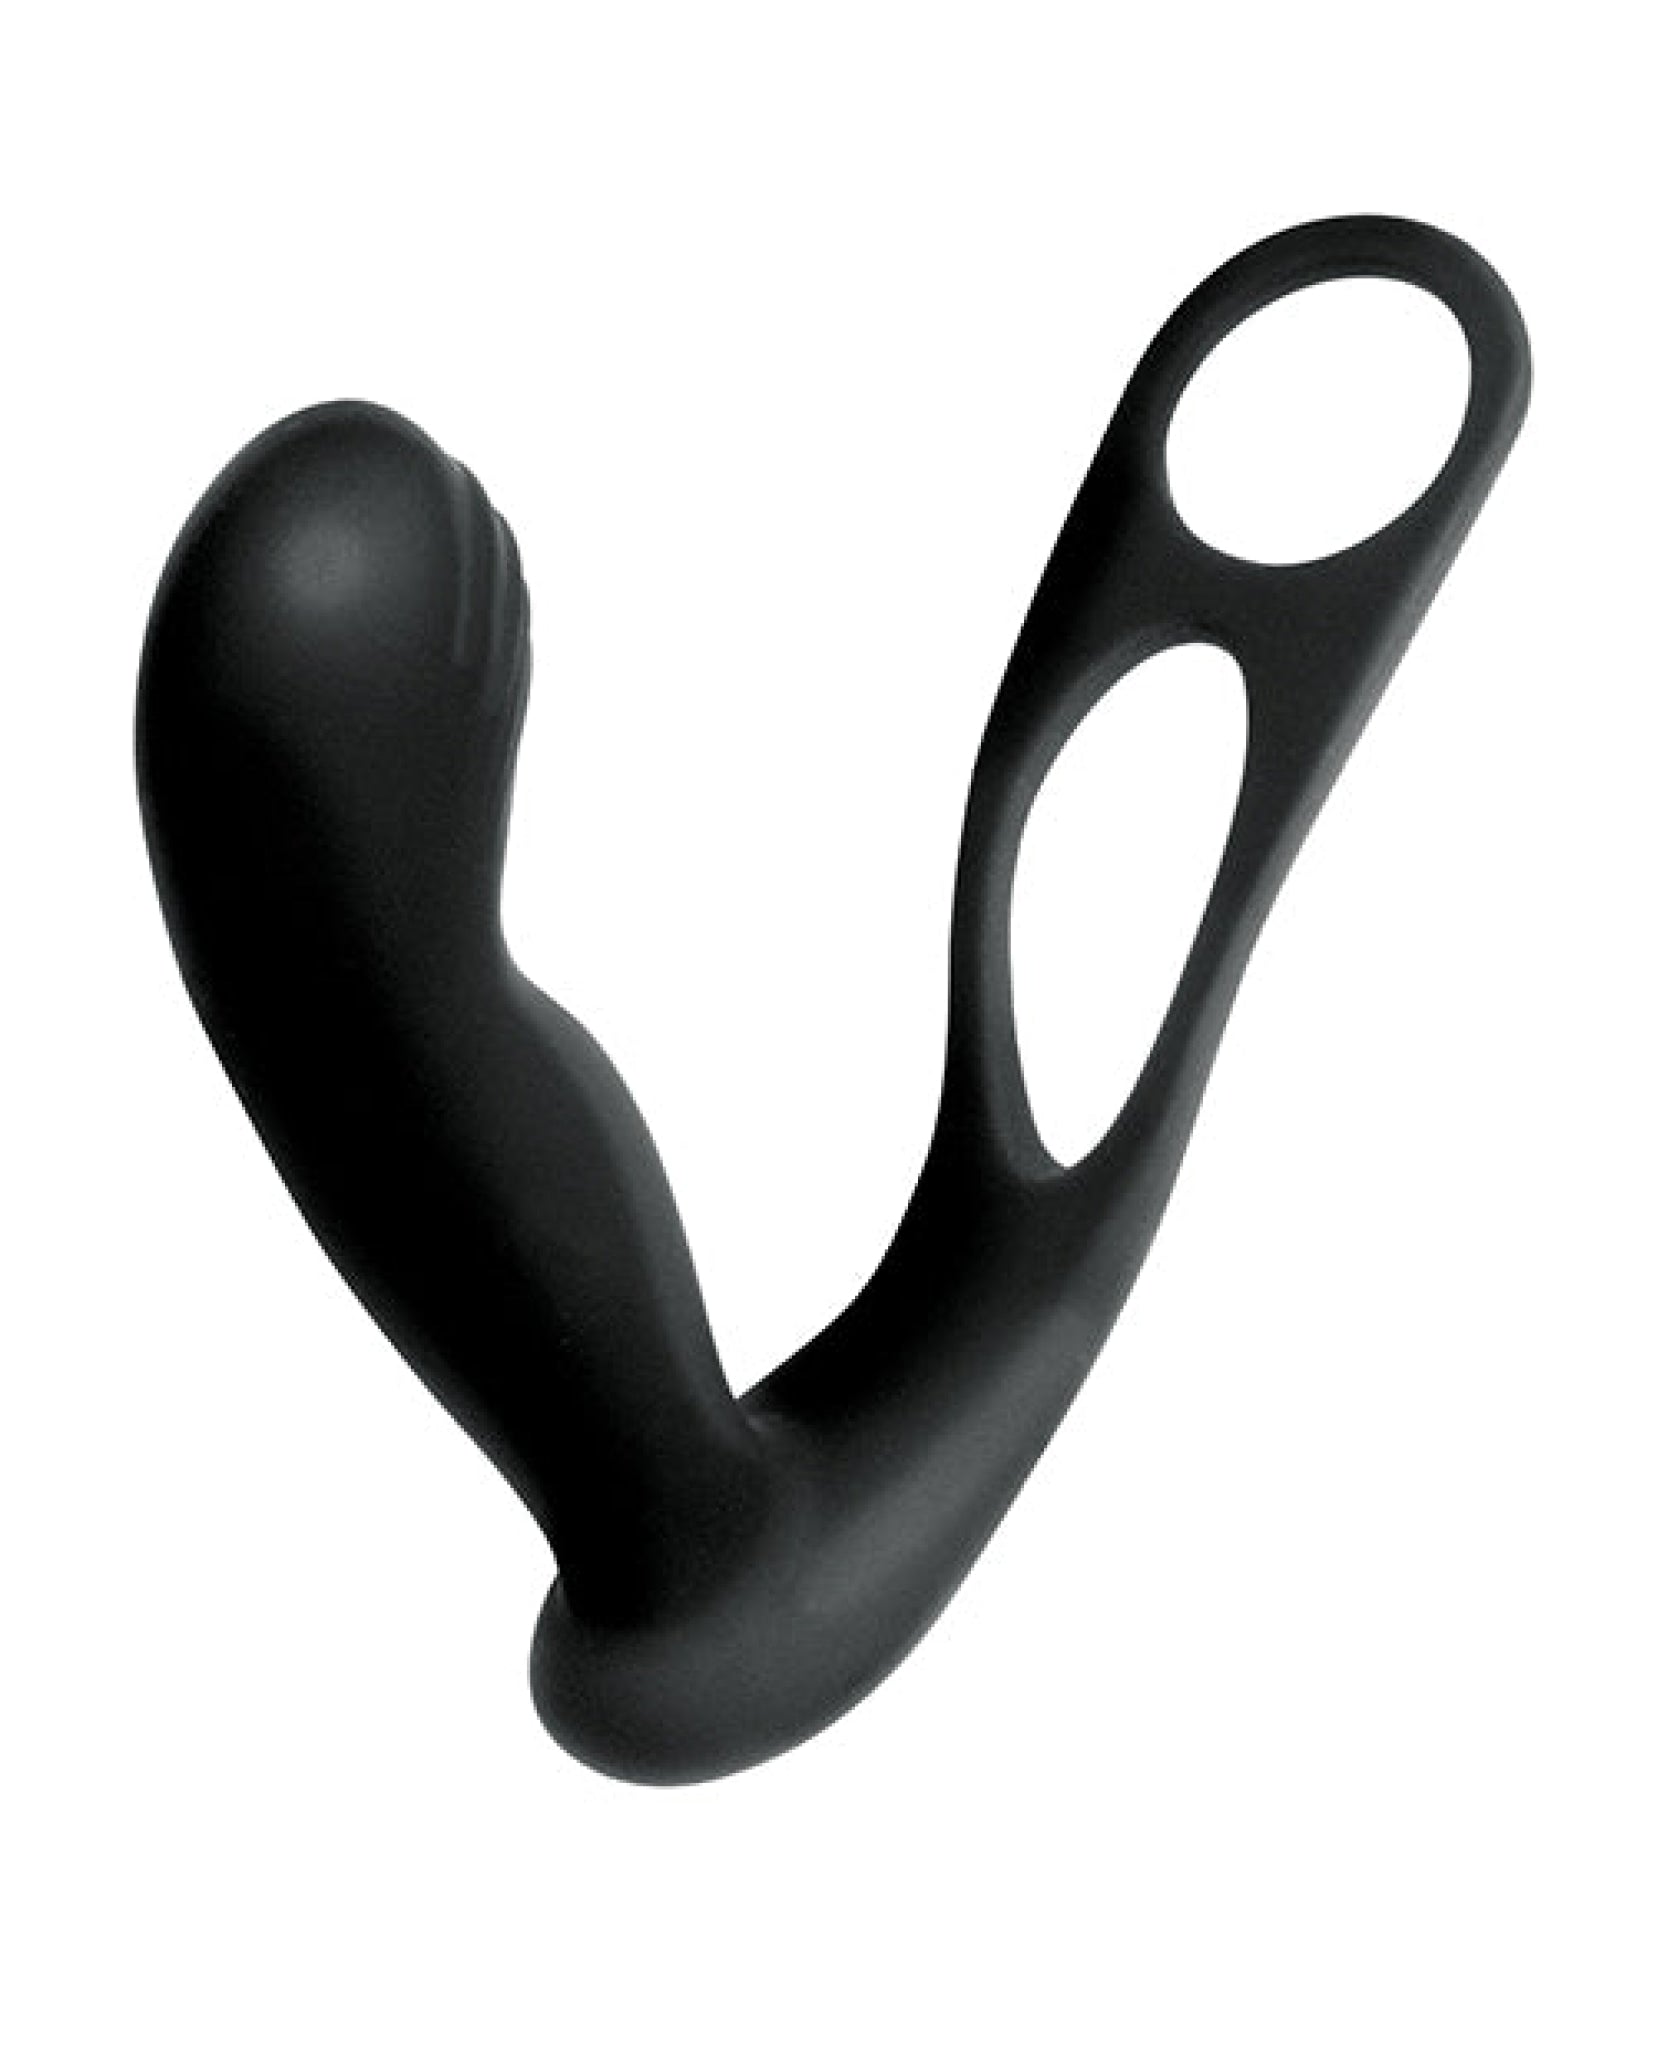 Butts Up Prostate Massager W-scrotum & Cockring - Black Nasstoys